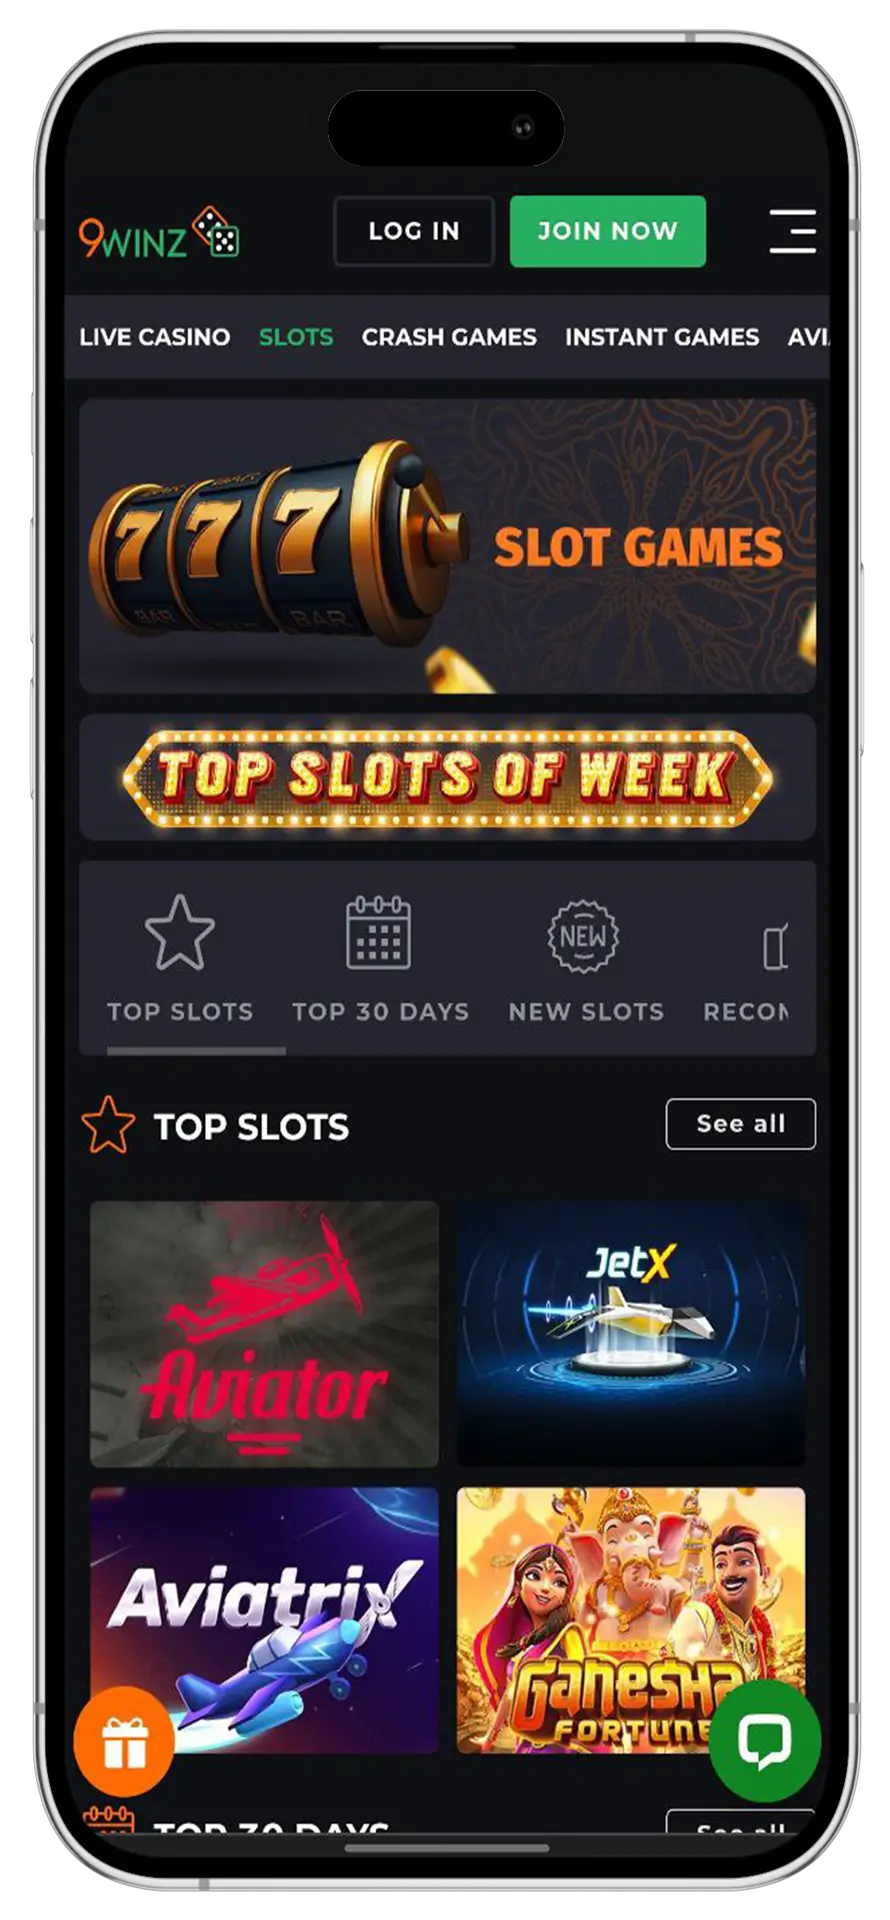 Visit at 9winz App Casino Section and start bet.